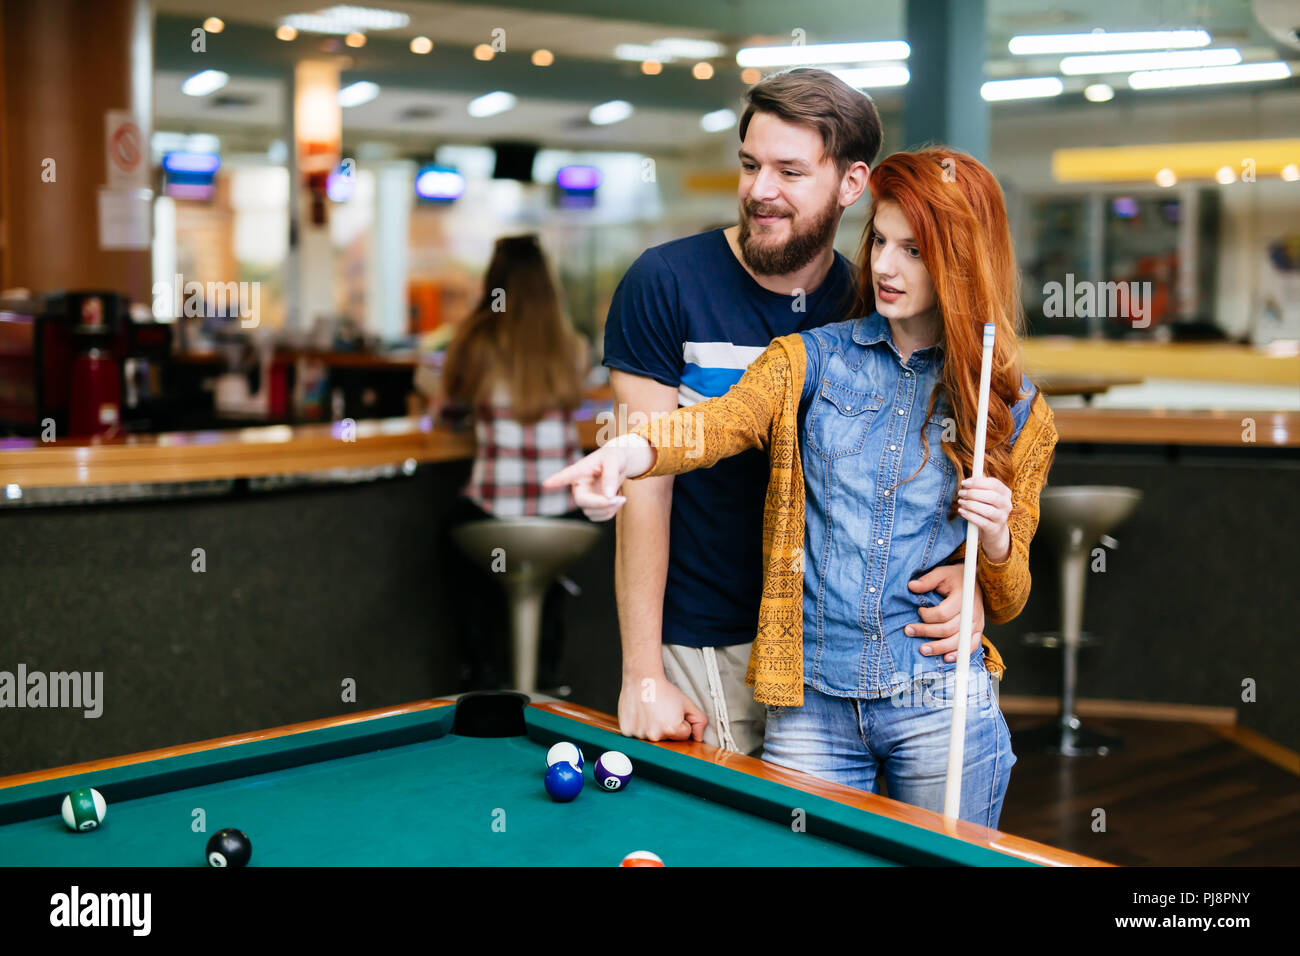 Beautiful couple playing billiards Banque D'Images